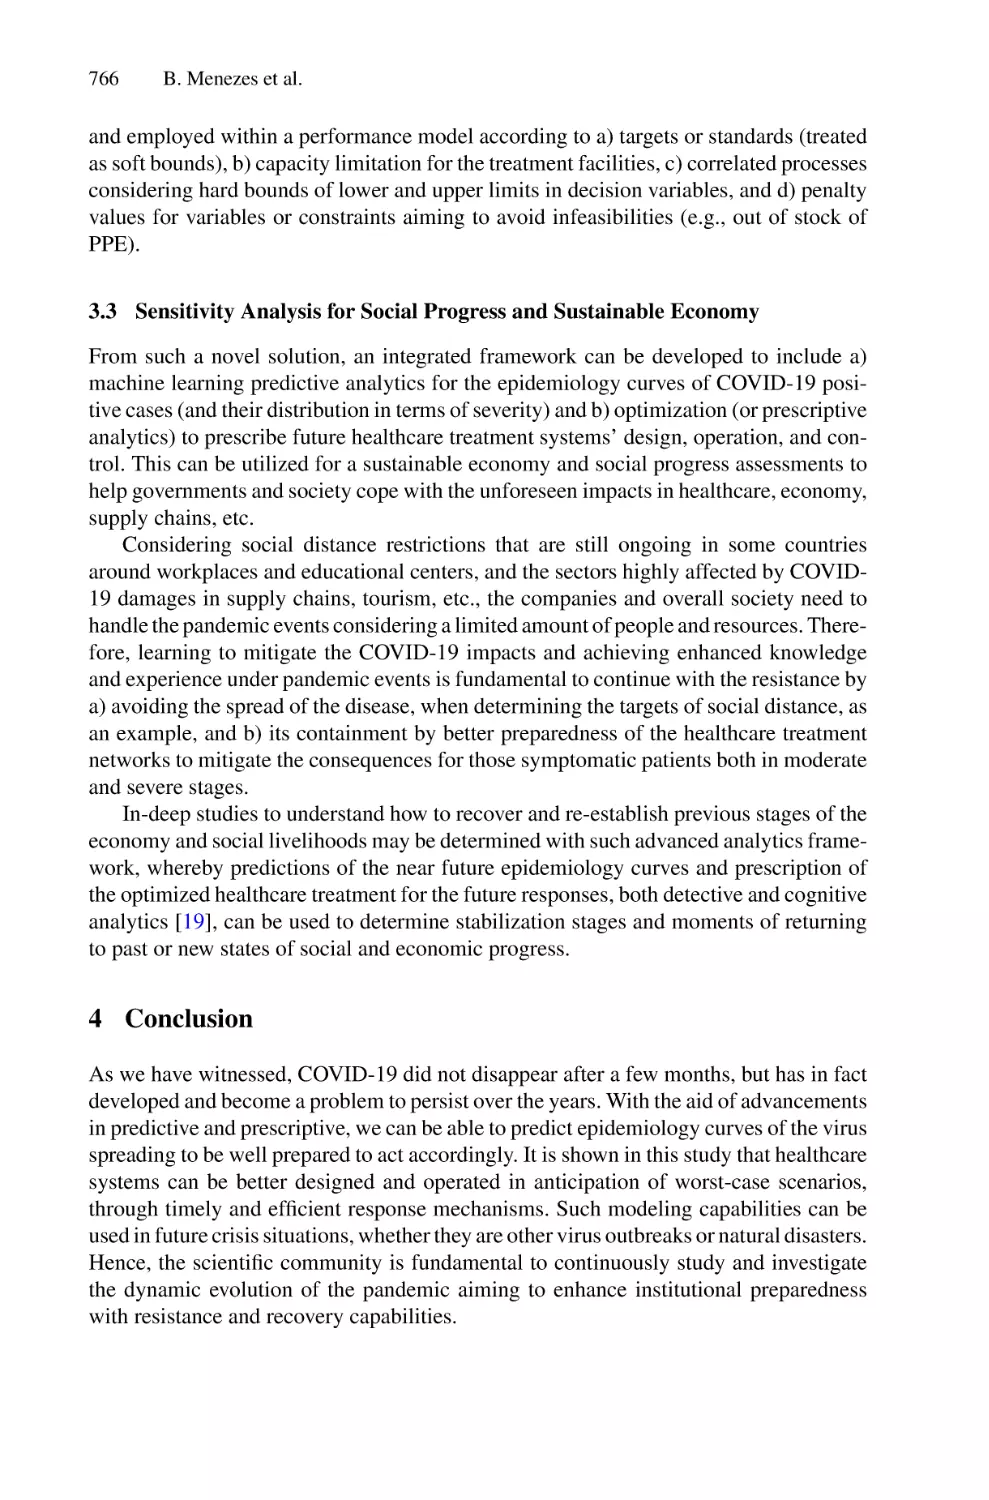 3.3 Sensitivity Analysis for Social Progress and Sustainable Economy
4 Conclusion